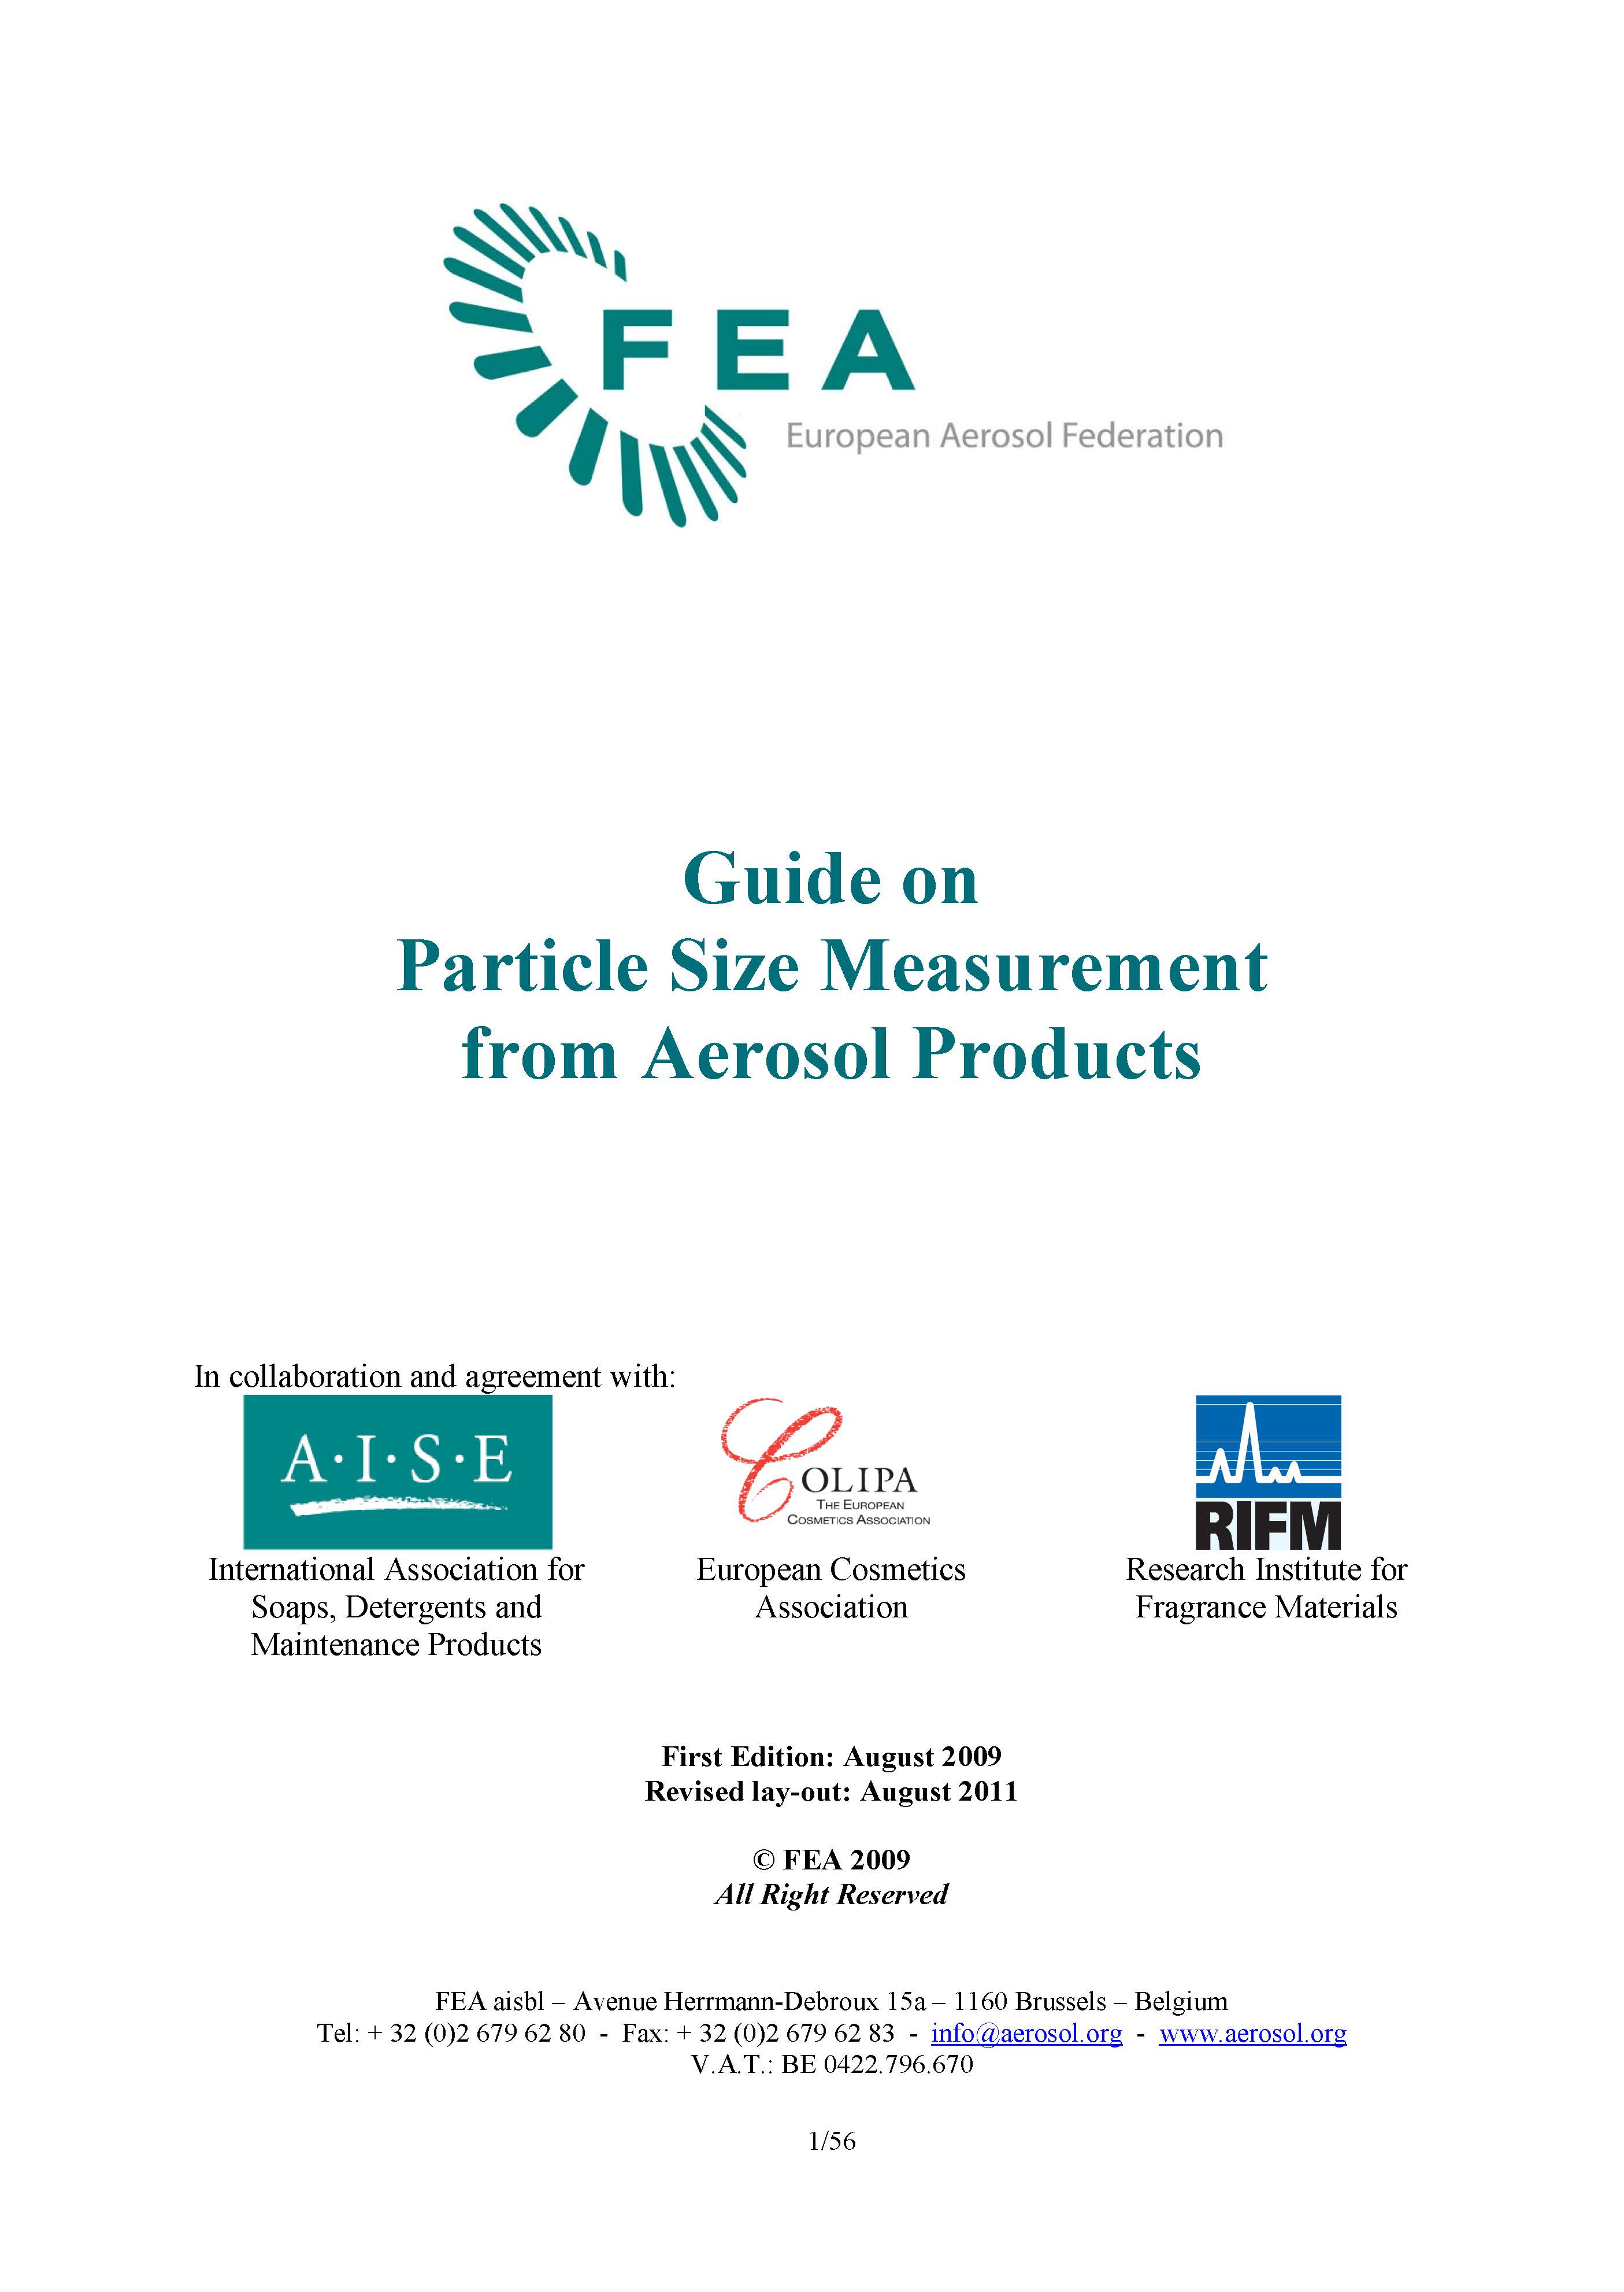 FEA Guide on Particle Size Measurement from Aerosol Products